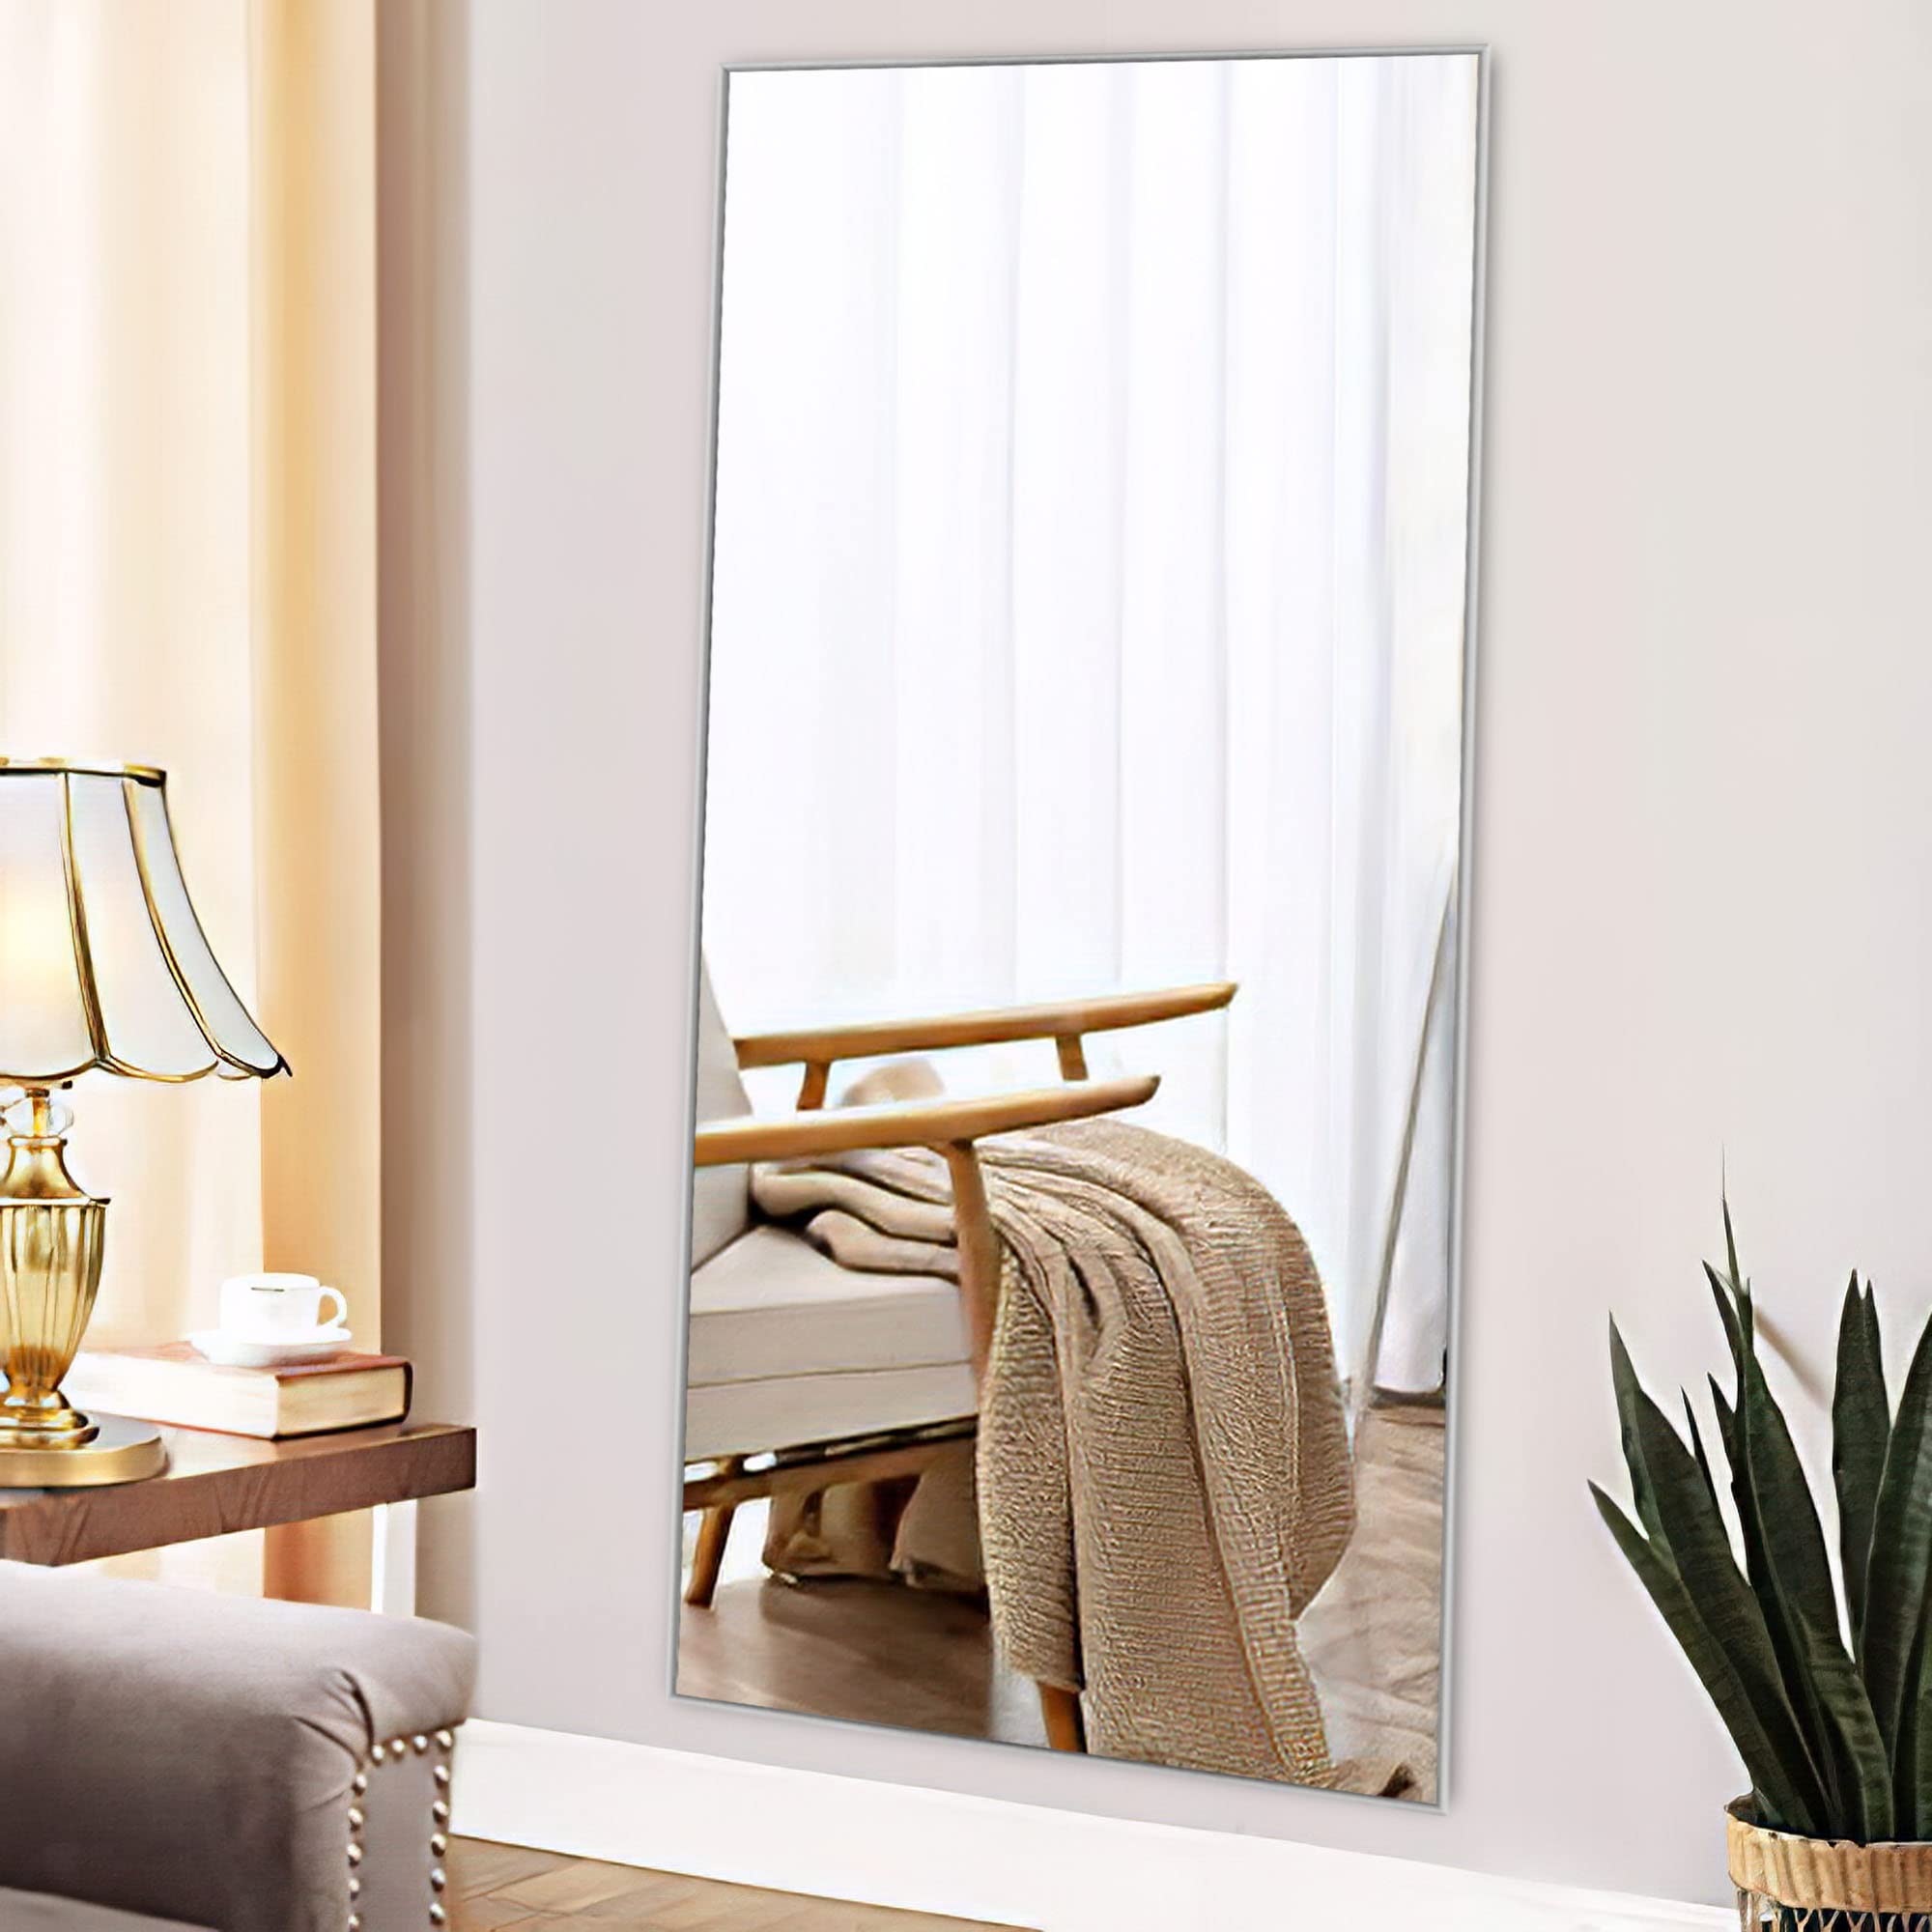 NeuType 47x22 Full Length Mirror Aluminum Alloy Frame Wall-Mounted Mirror for Living Room, Bedroom, Entry, Hanging or Leaning Ag